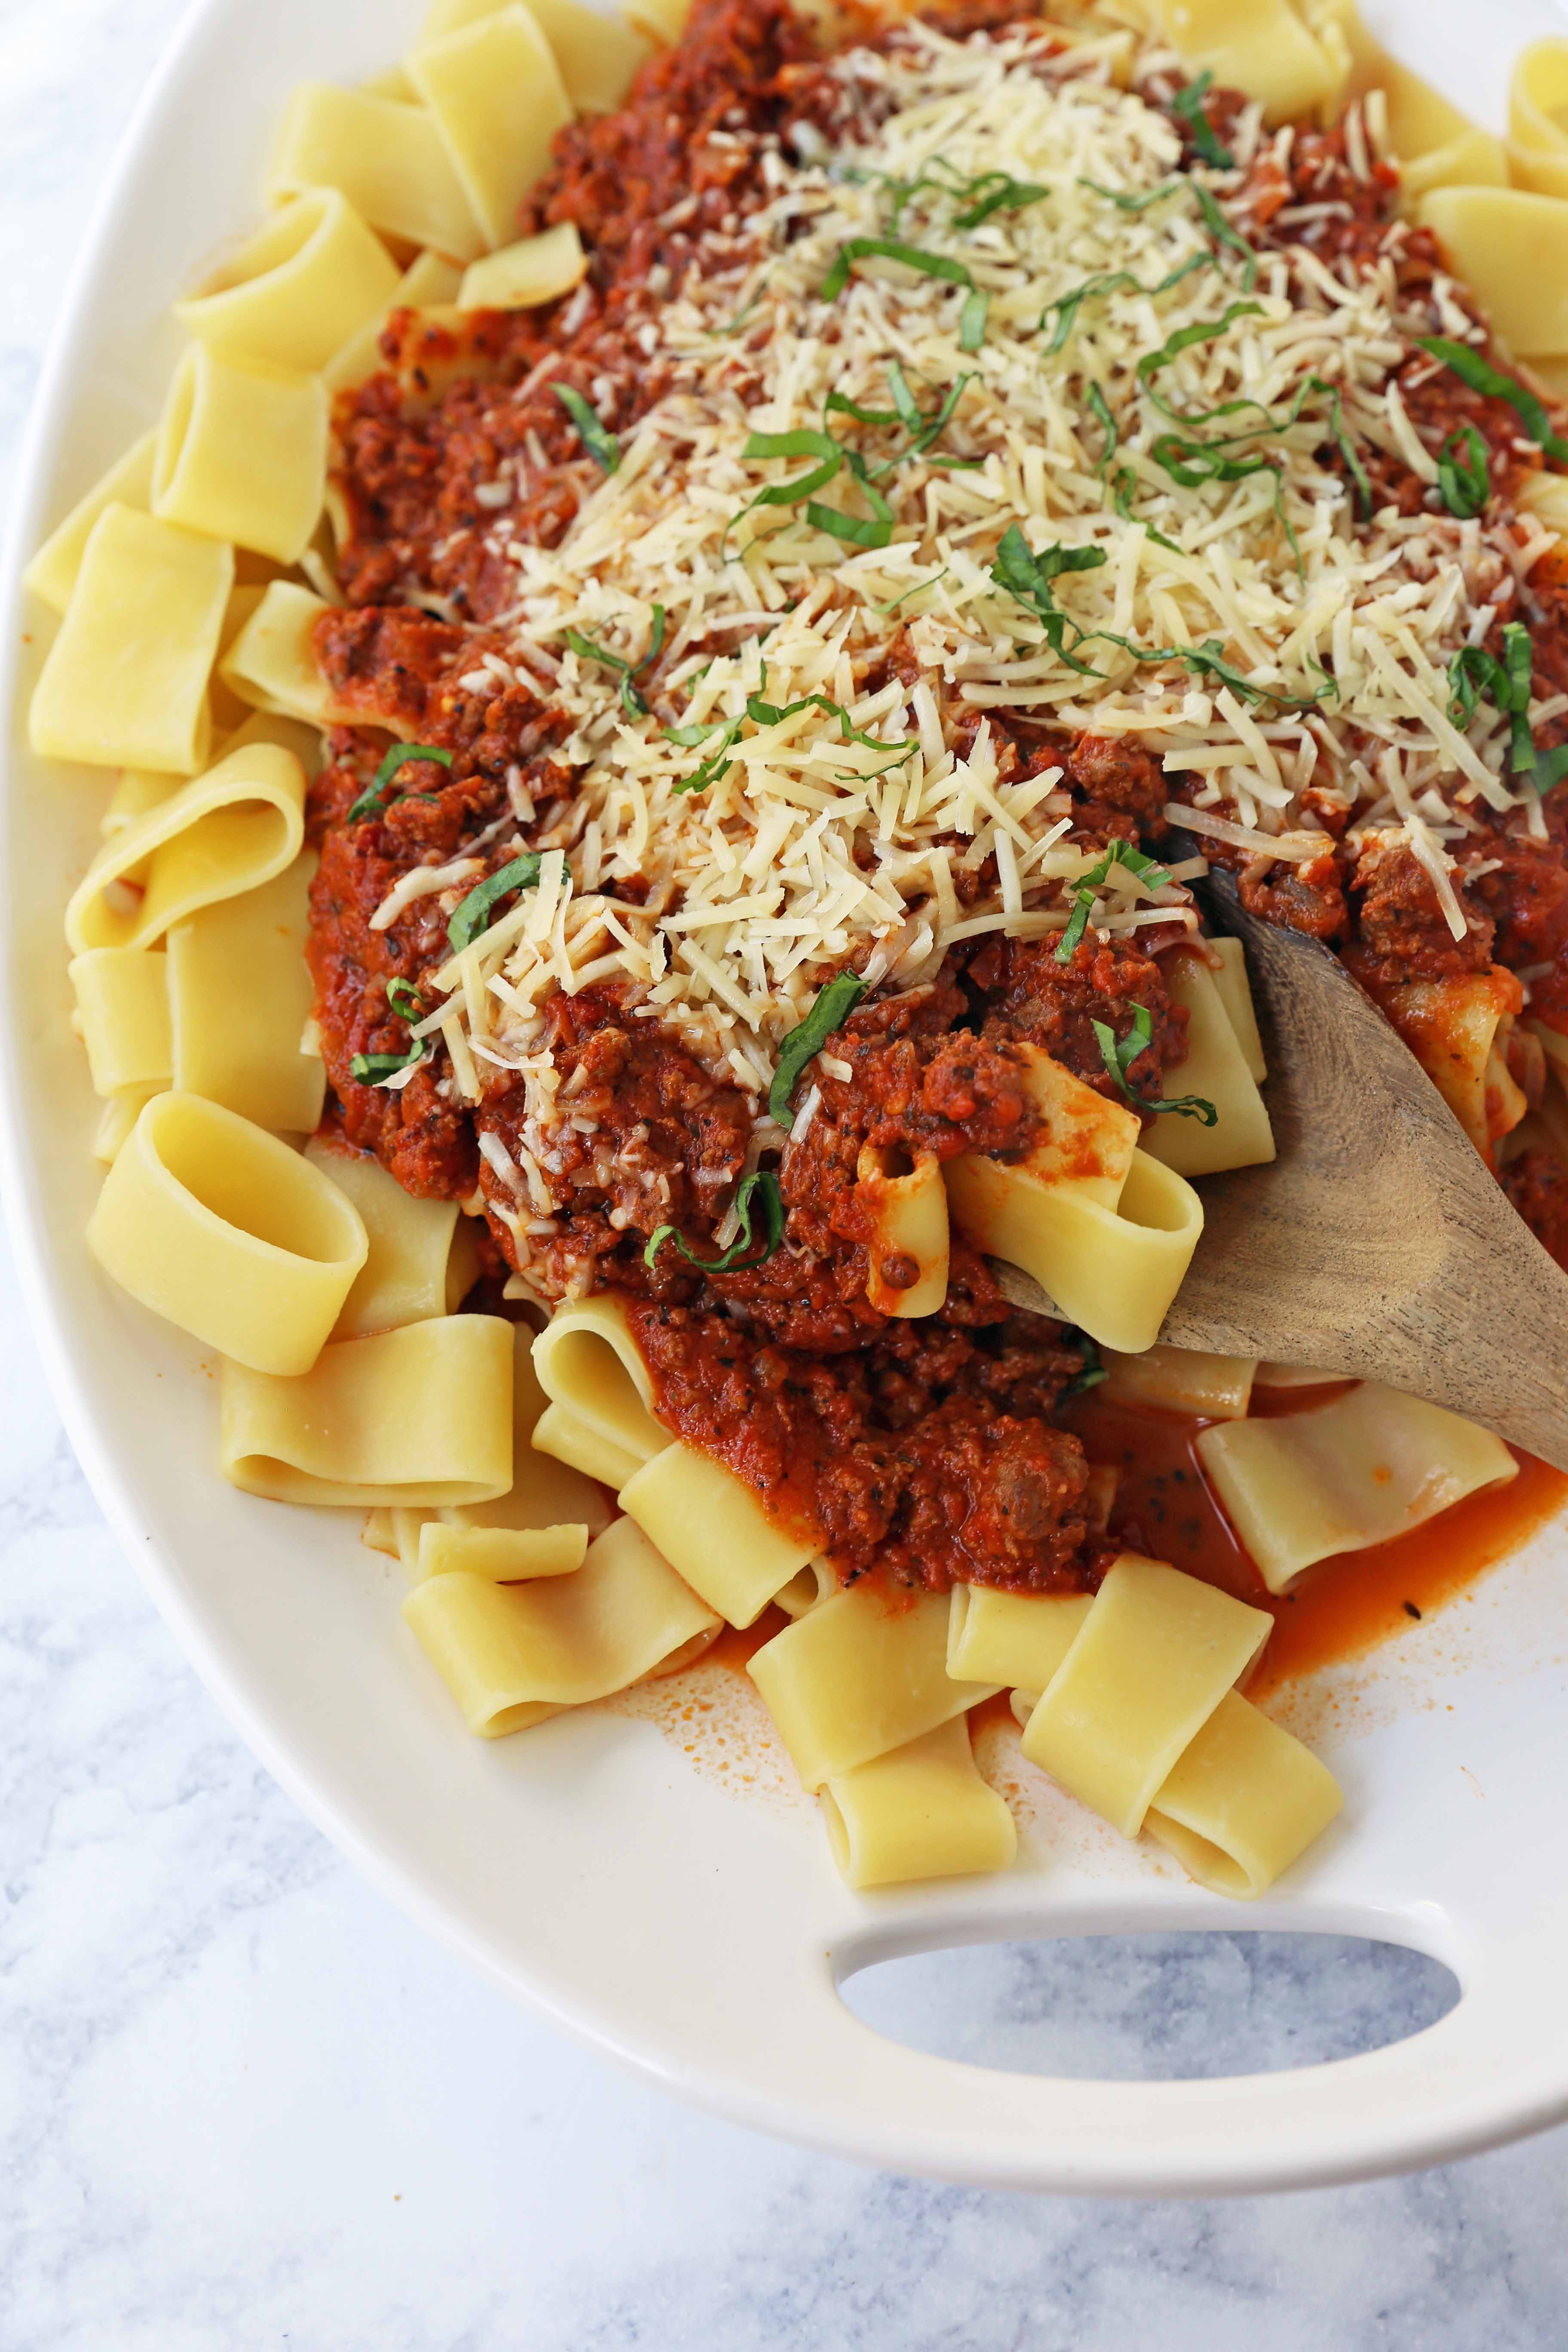 Beef Bolognese Sauce. Authentic Italian Beef Bolognese Sauce on top of fresh pasta is a warm, weeknight dish made in less than 30 minutes. www.modernhoney.com #italian #beefbolognese #pasta #spaghetti #italianfood